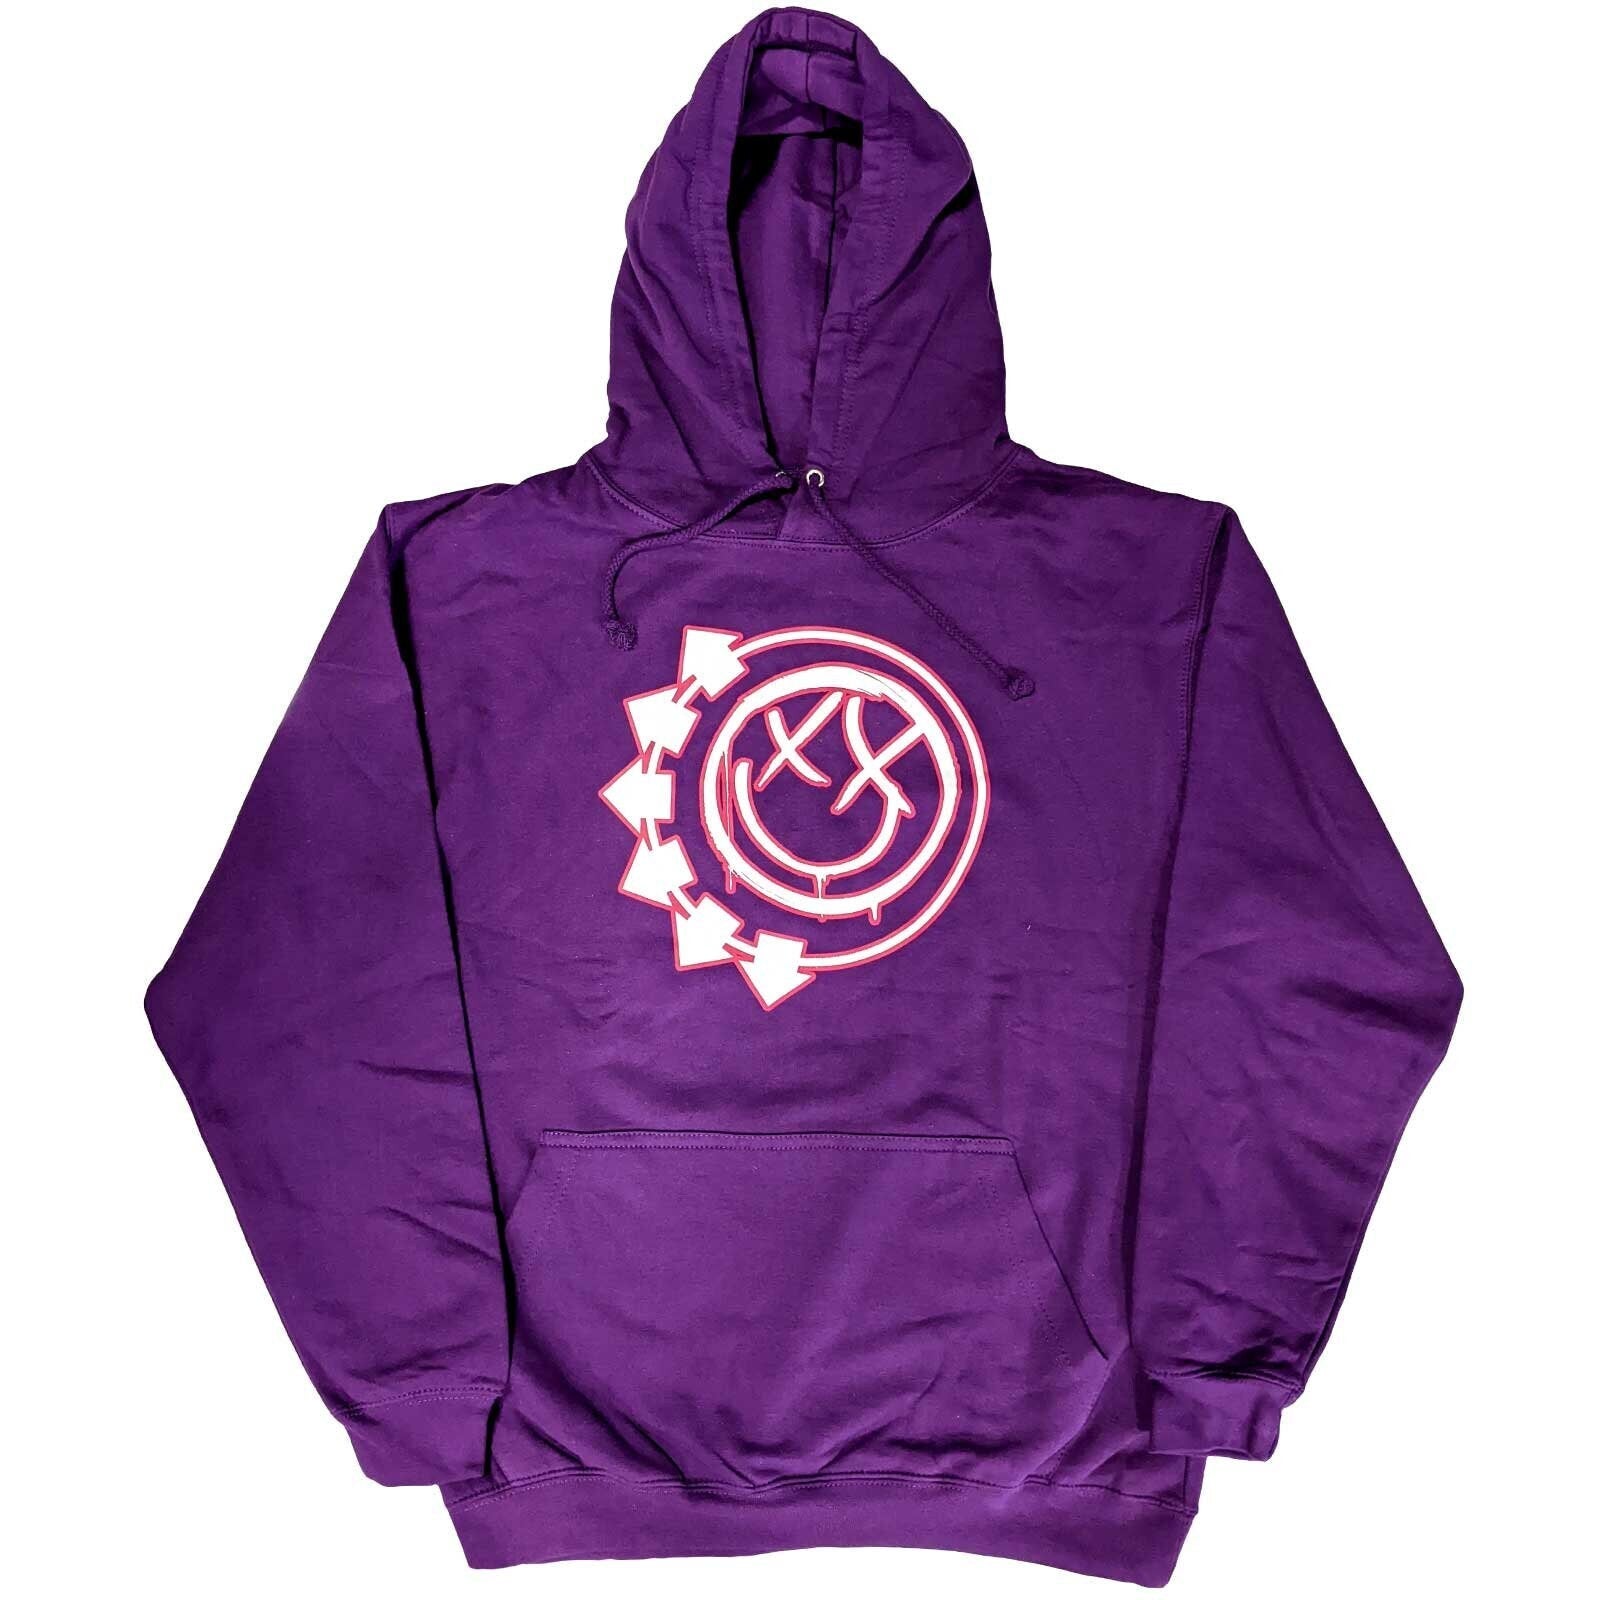 Blink 182 Unisex Pullover Hoodie - Six Arrow Smiley - Purple Unisex Official Licensed Design - Worldwide Shipping - Jelly Frog